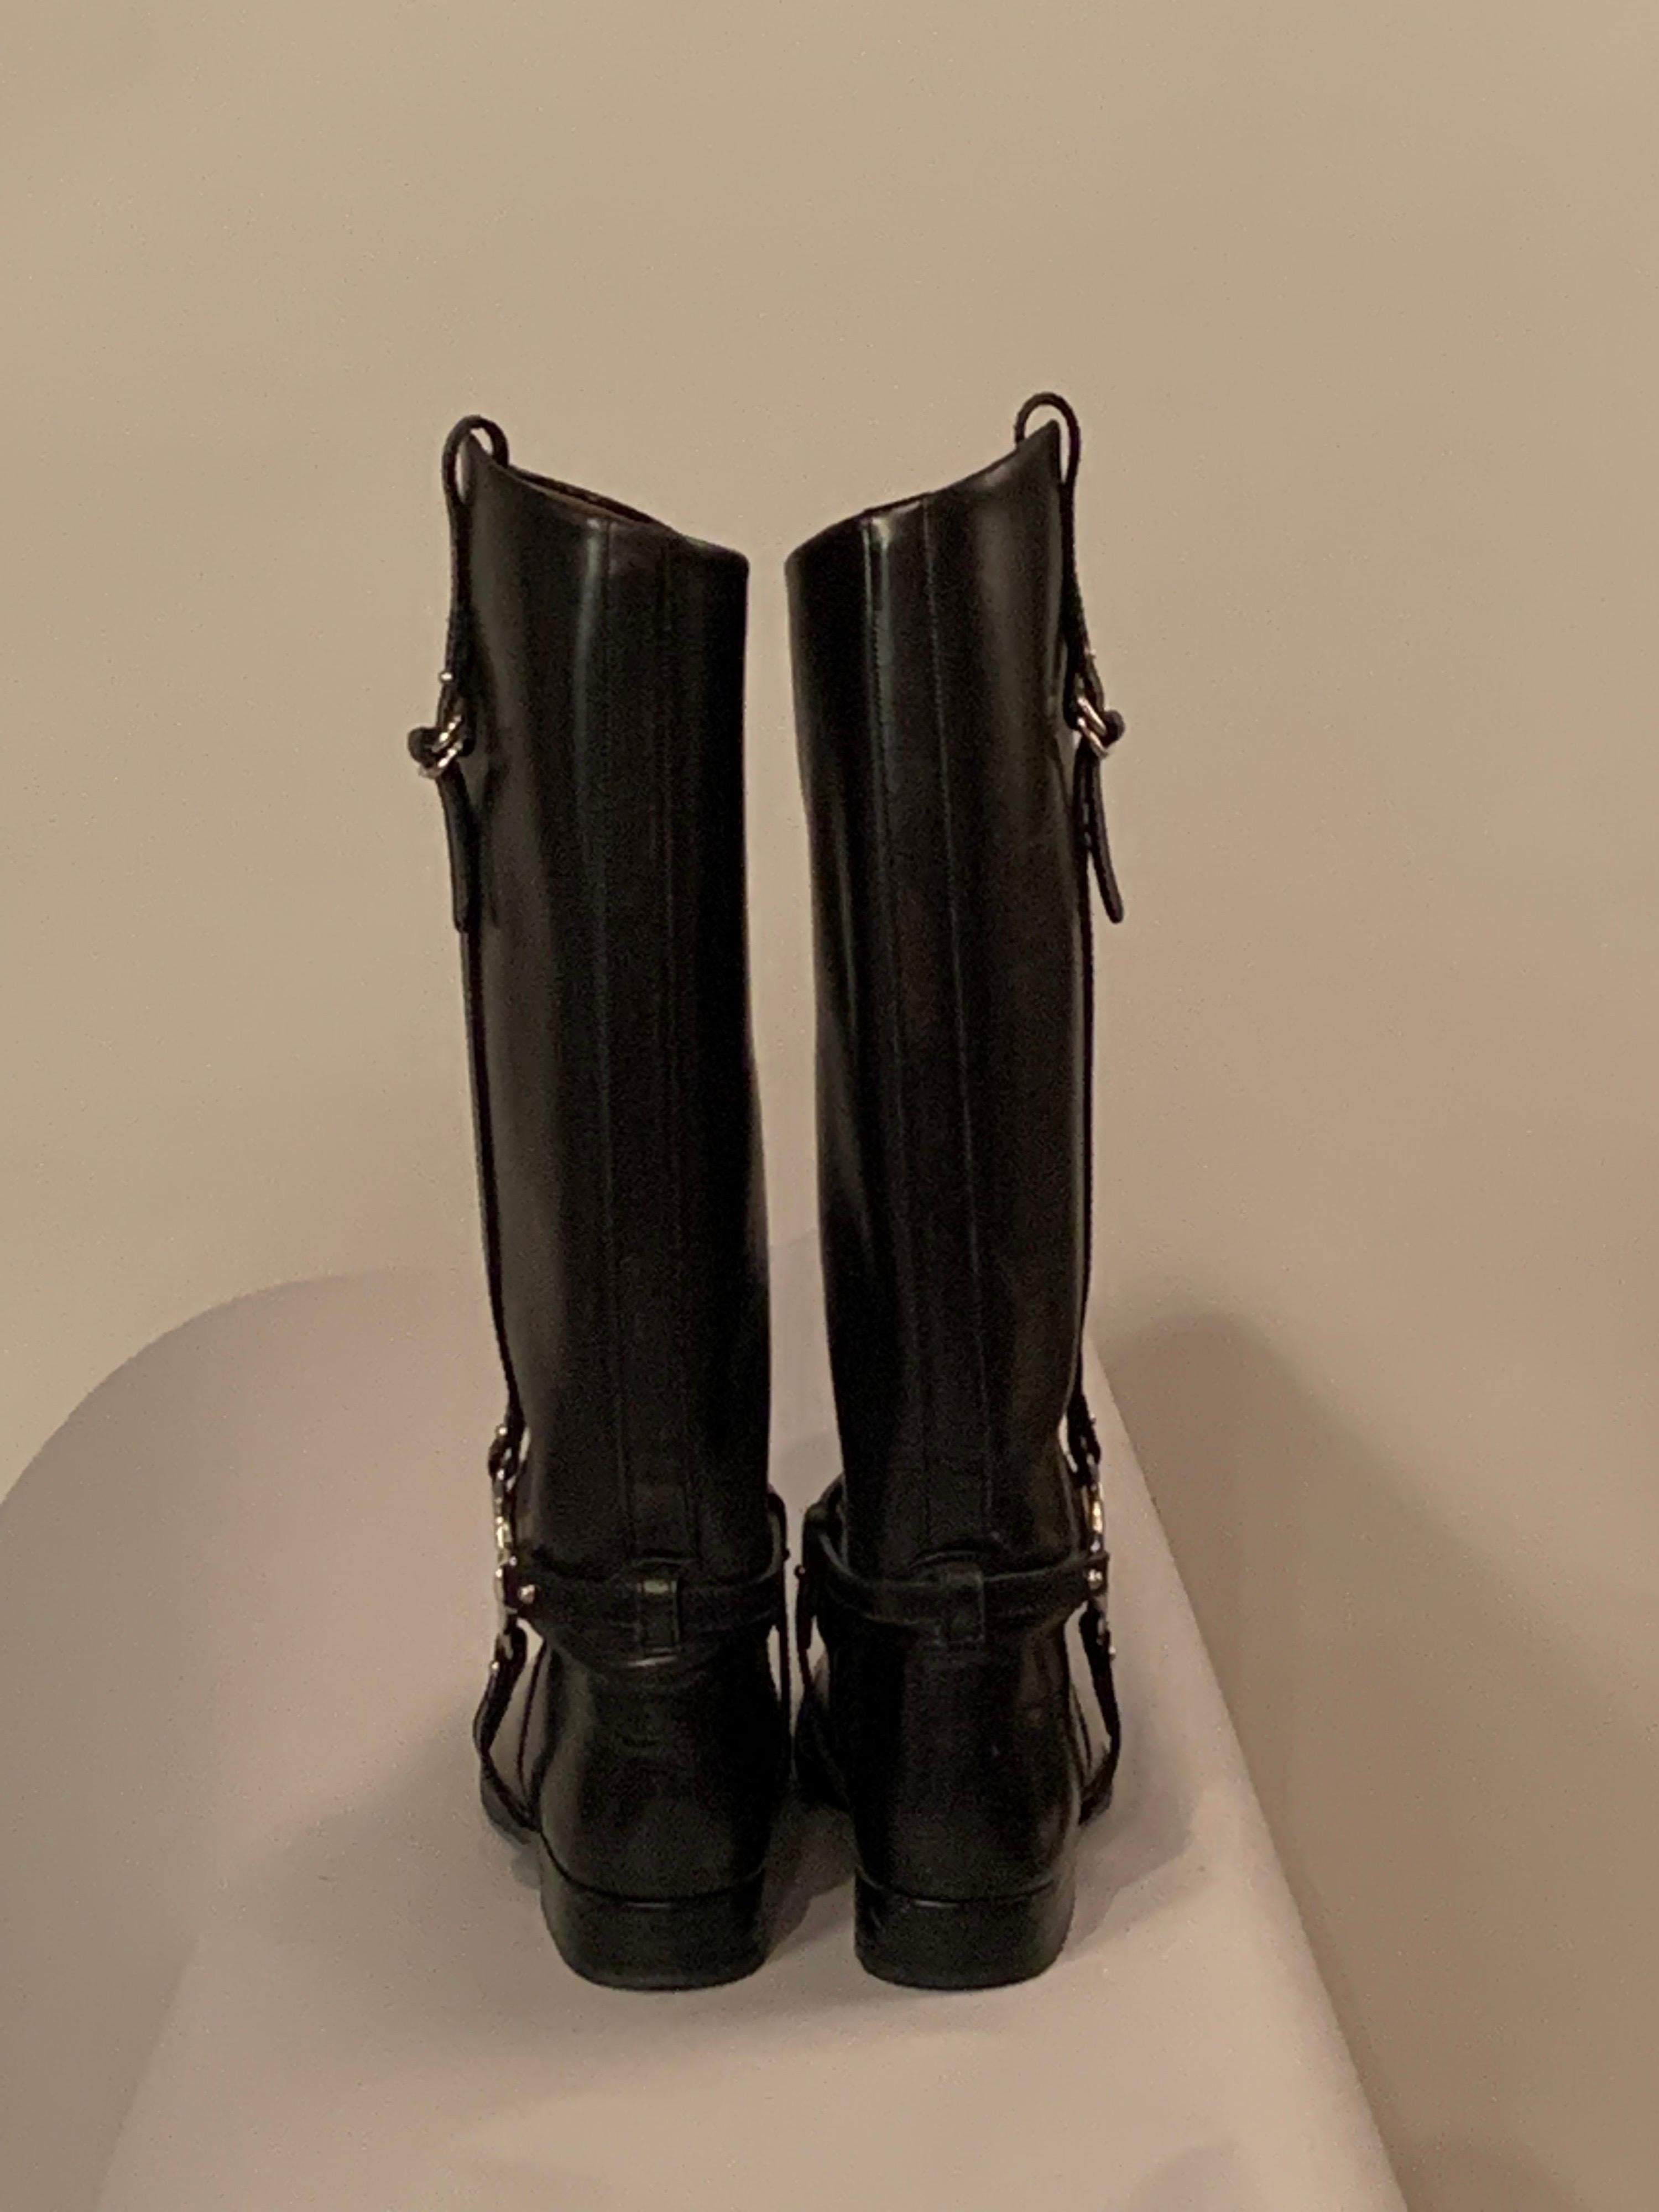 Gucci Black Leather Equestrian Style Boots  Size 37 2